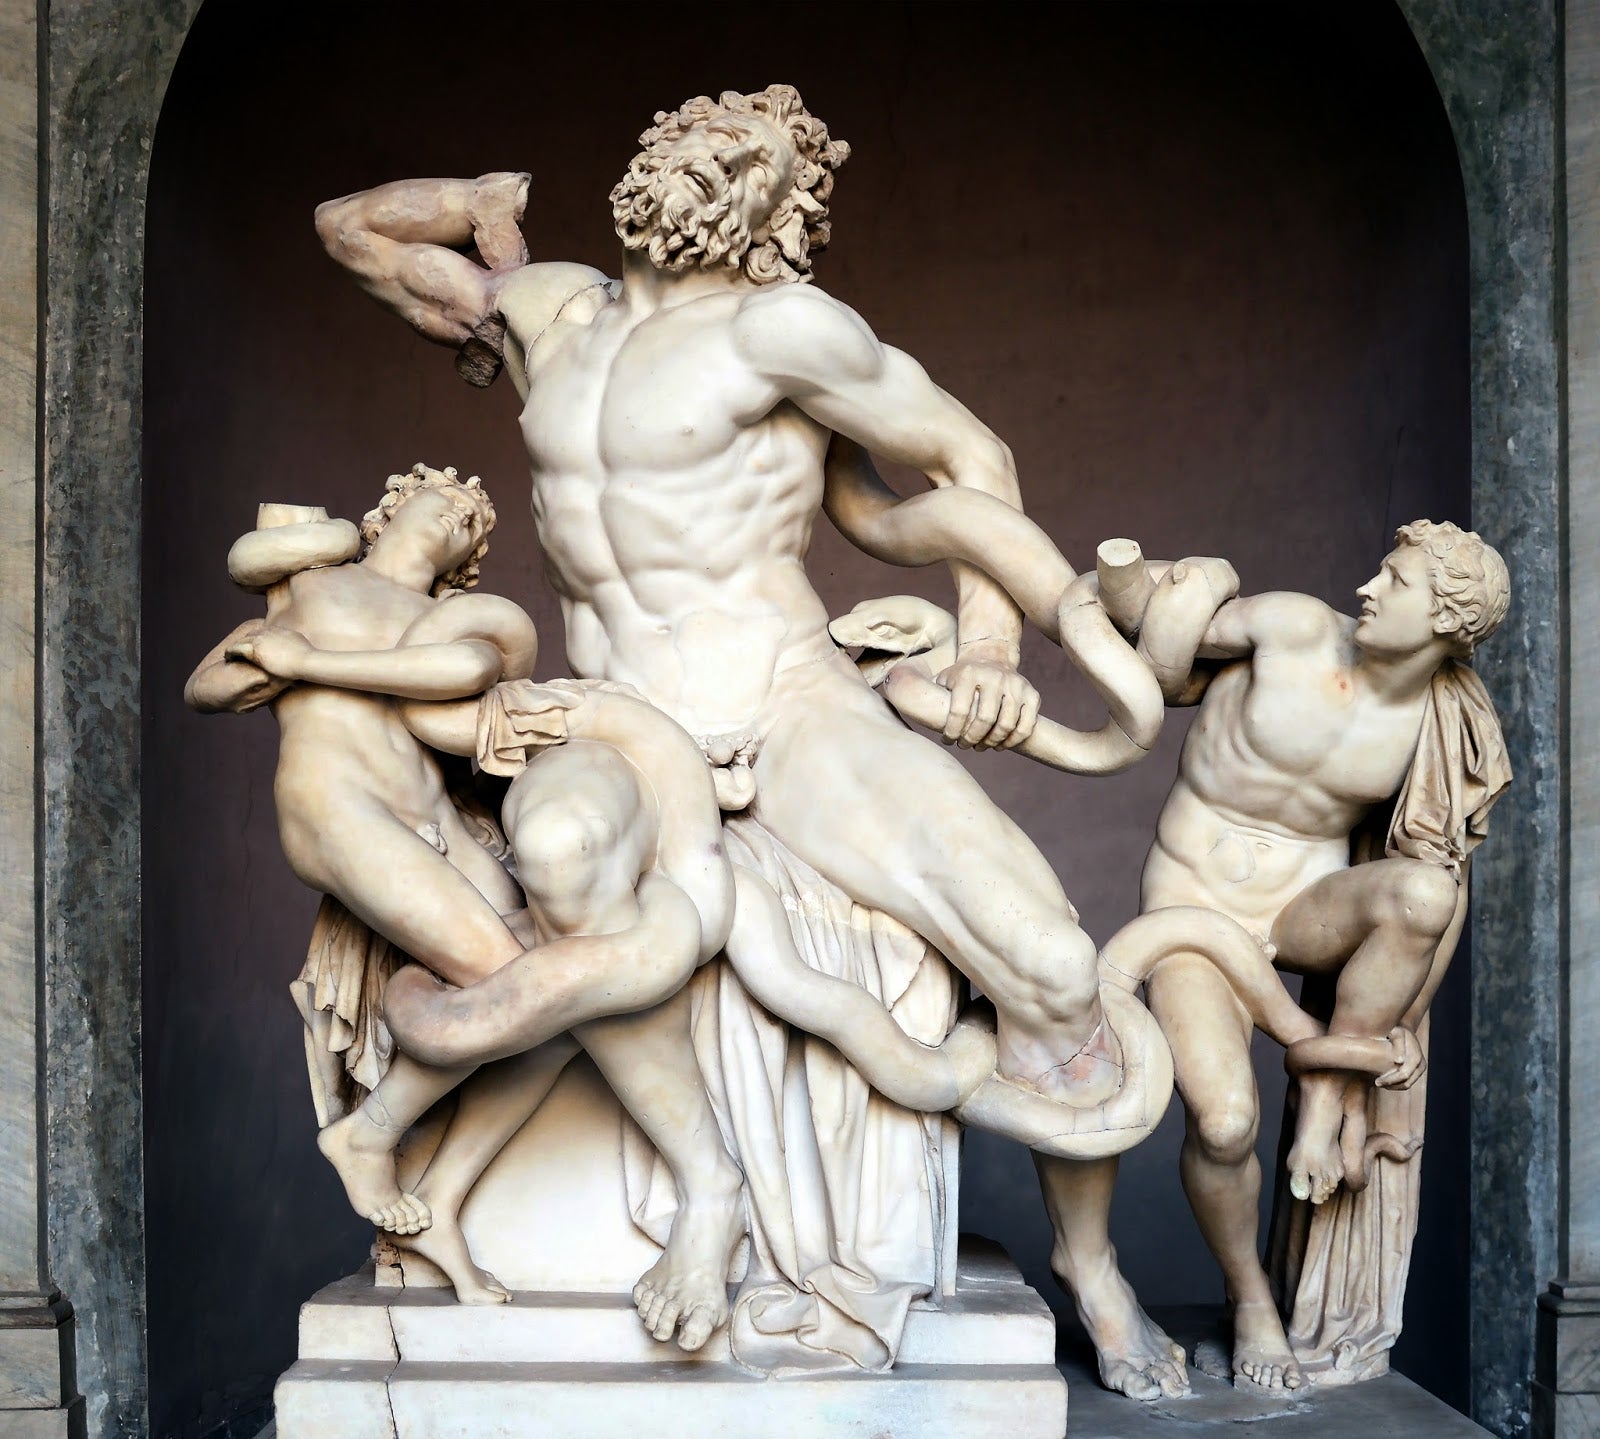 The Laocoön and his sons